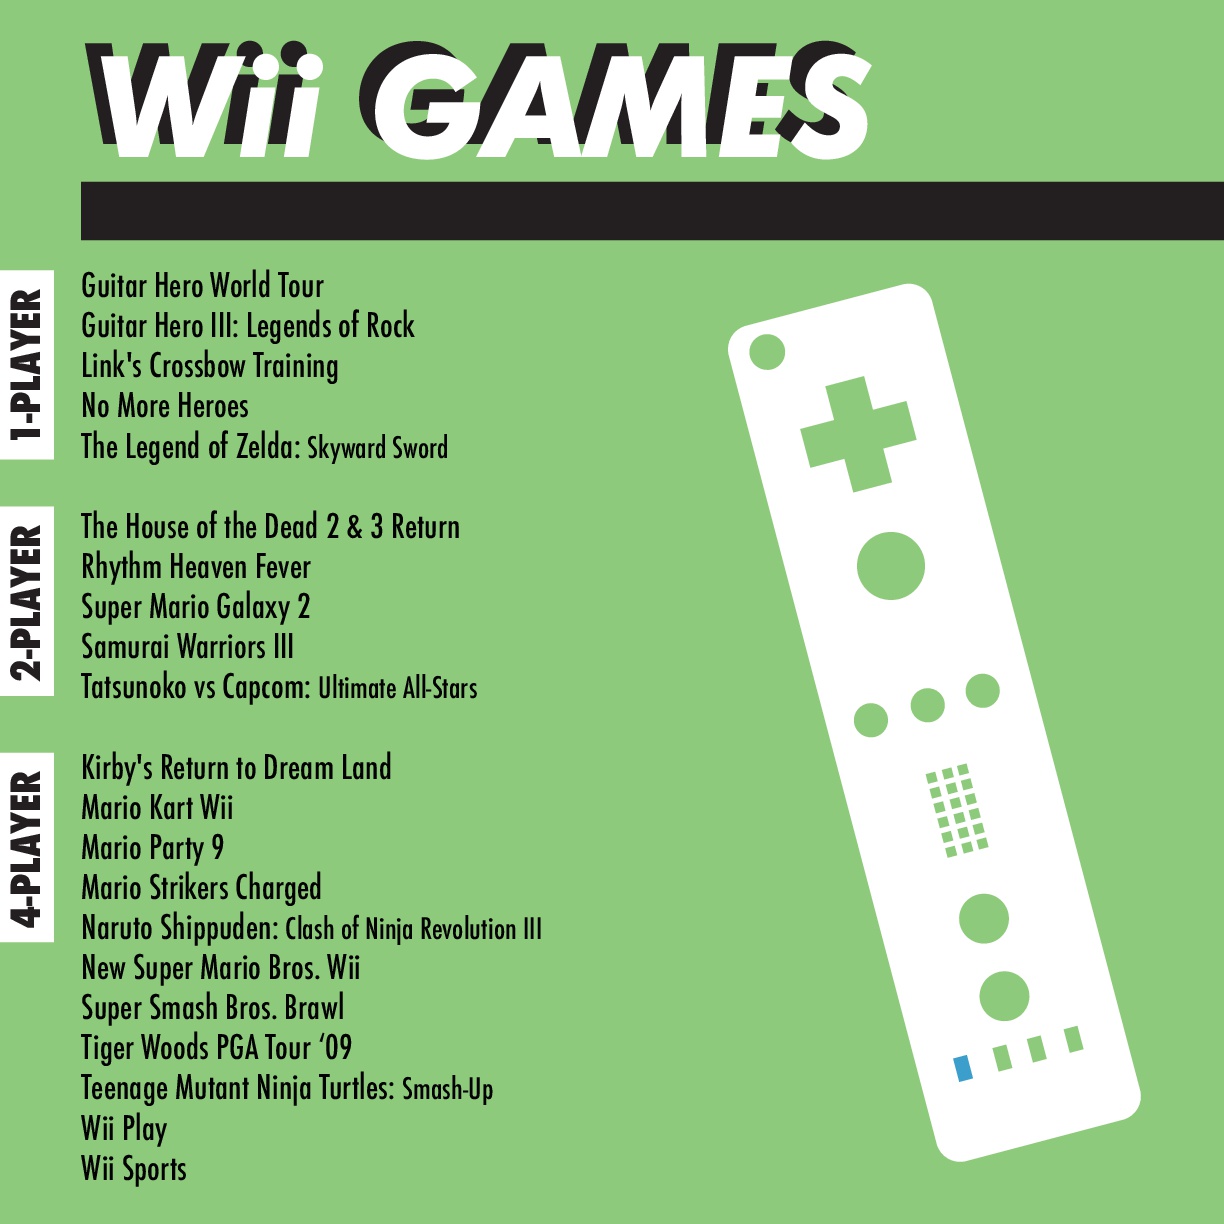 ASLC Student Life Gaming - Wii Games